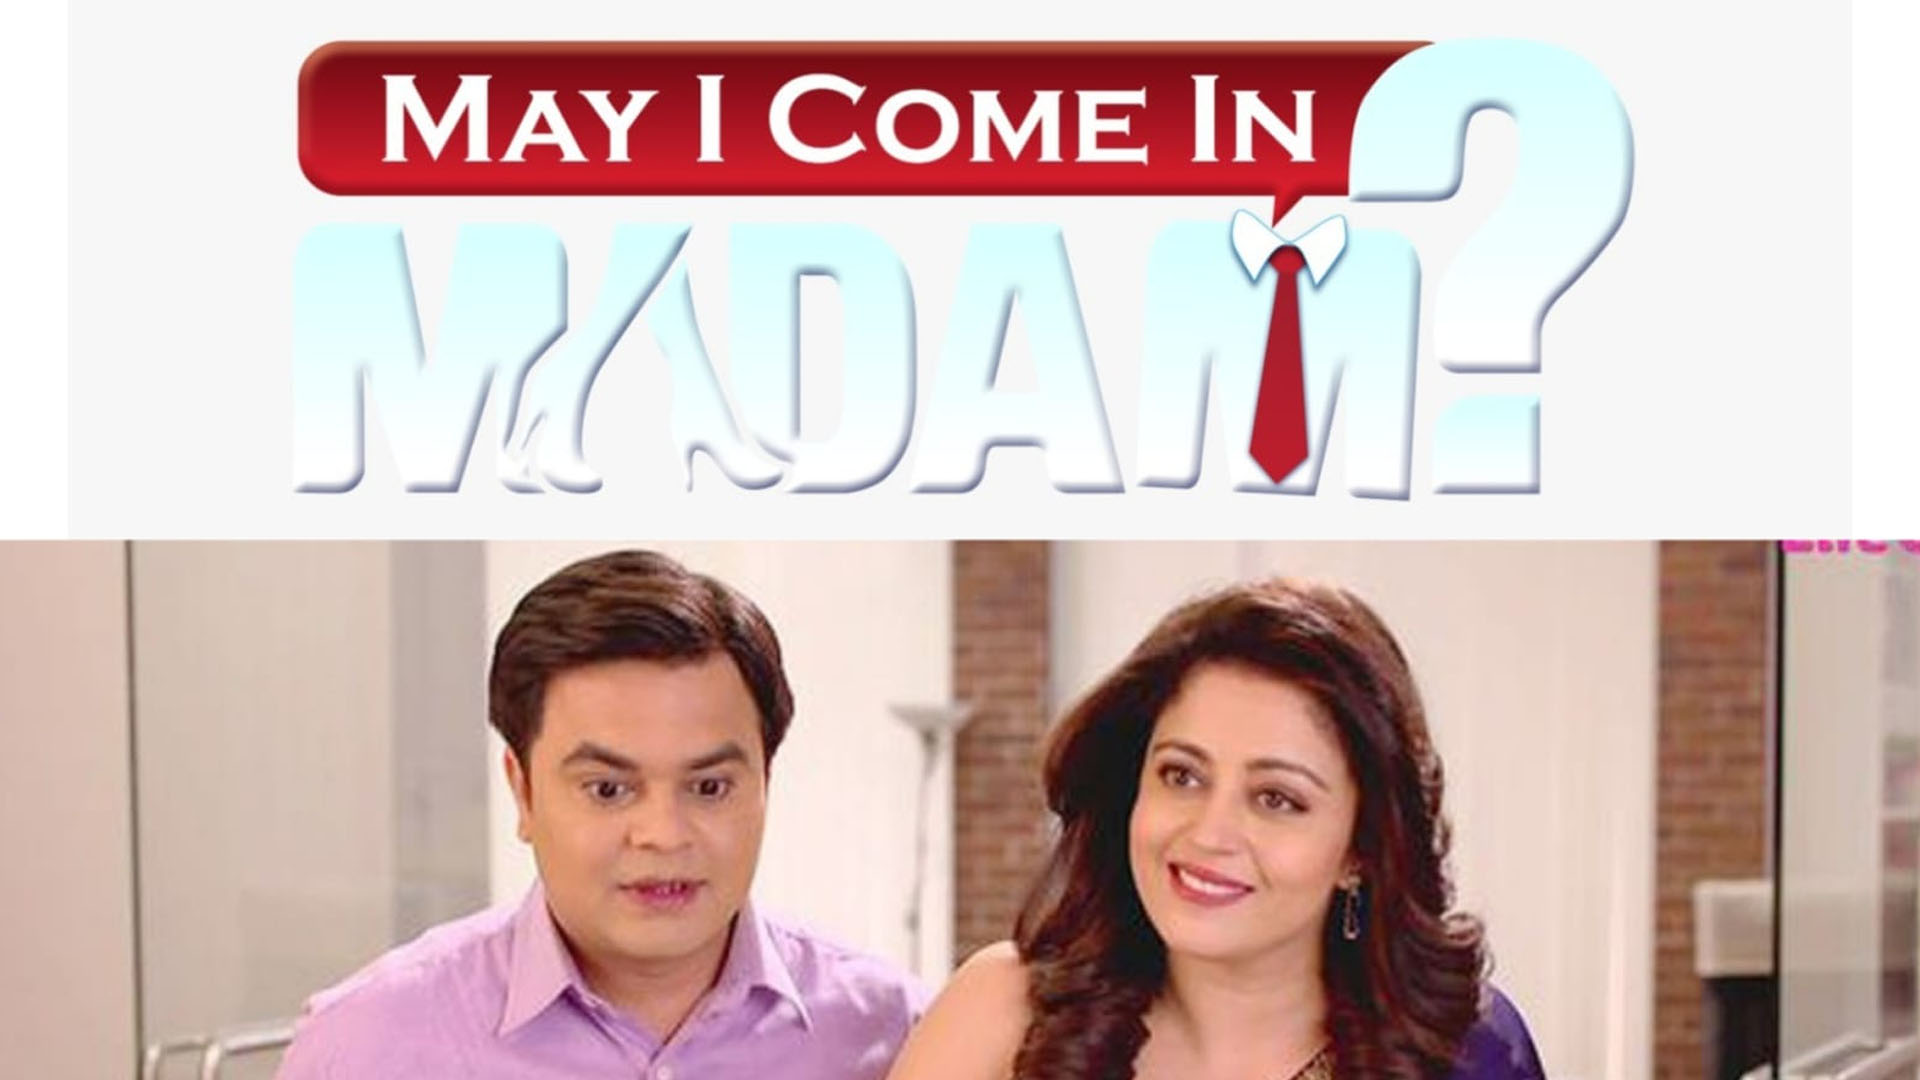 Star Bharat is all set to present new episodes of the popular show “May I Come in Madam?” with a ceremonial Muhurat pooja to mark the beginning of the shooting process.